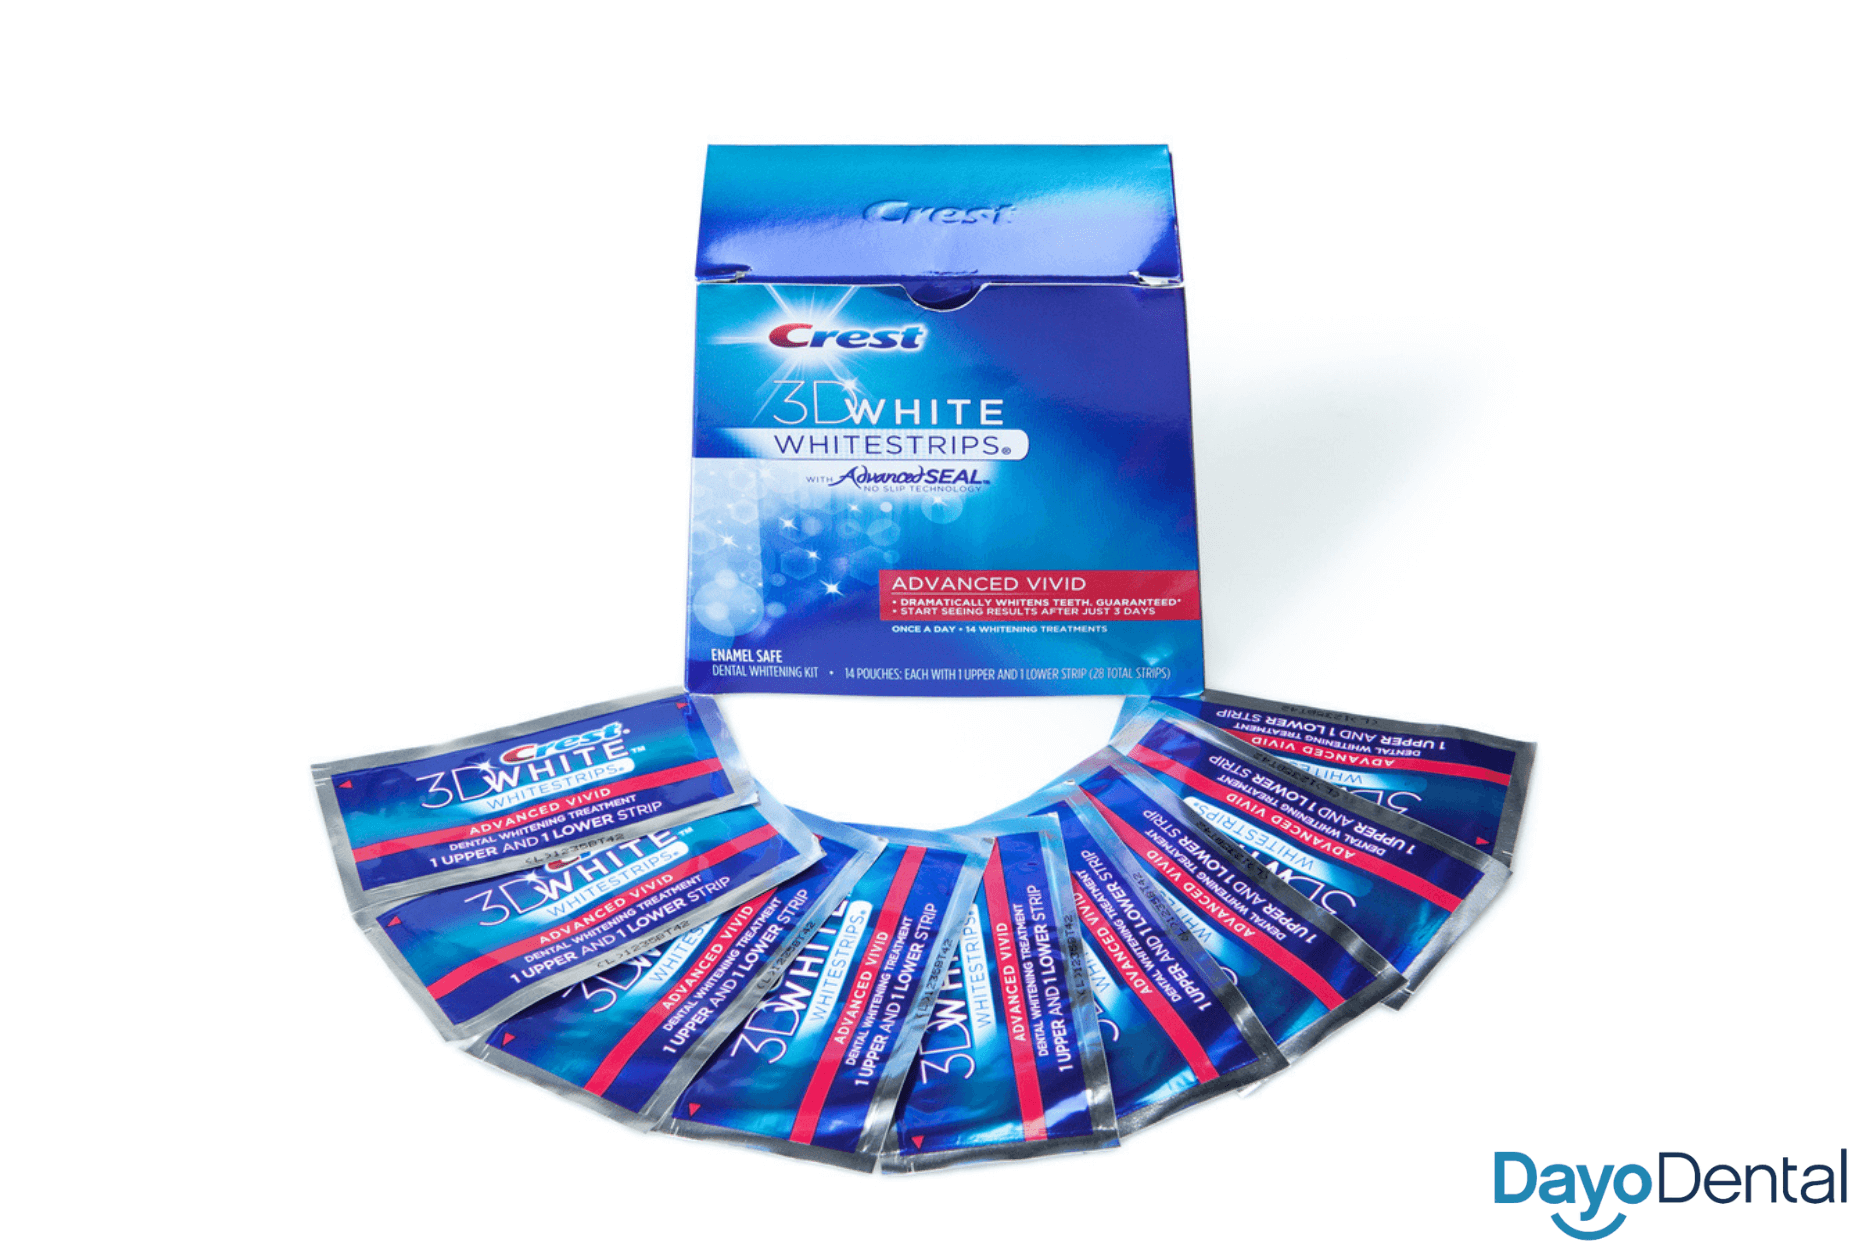 Crest 3D White Strips one of the most popular at-home whitening kits